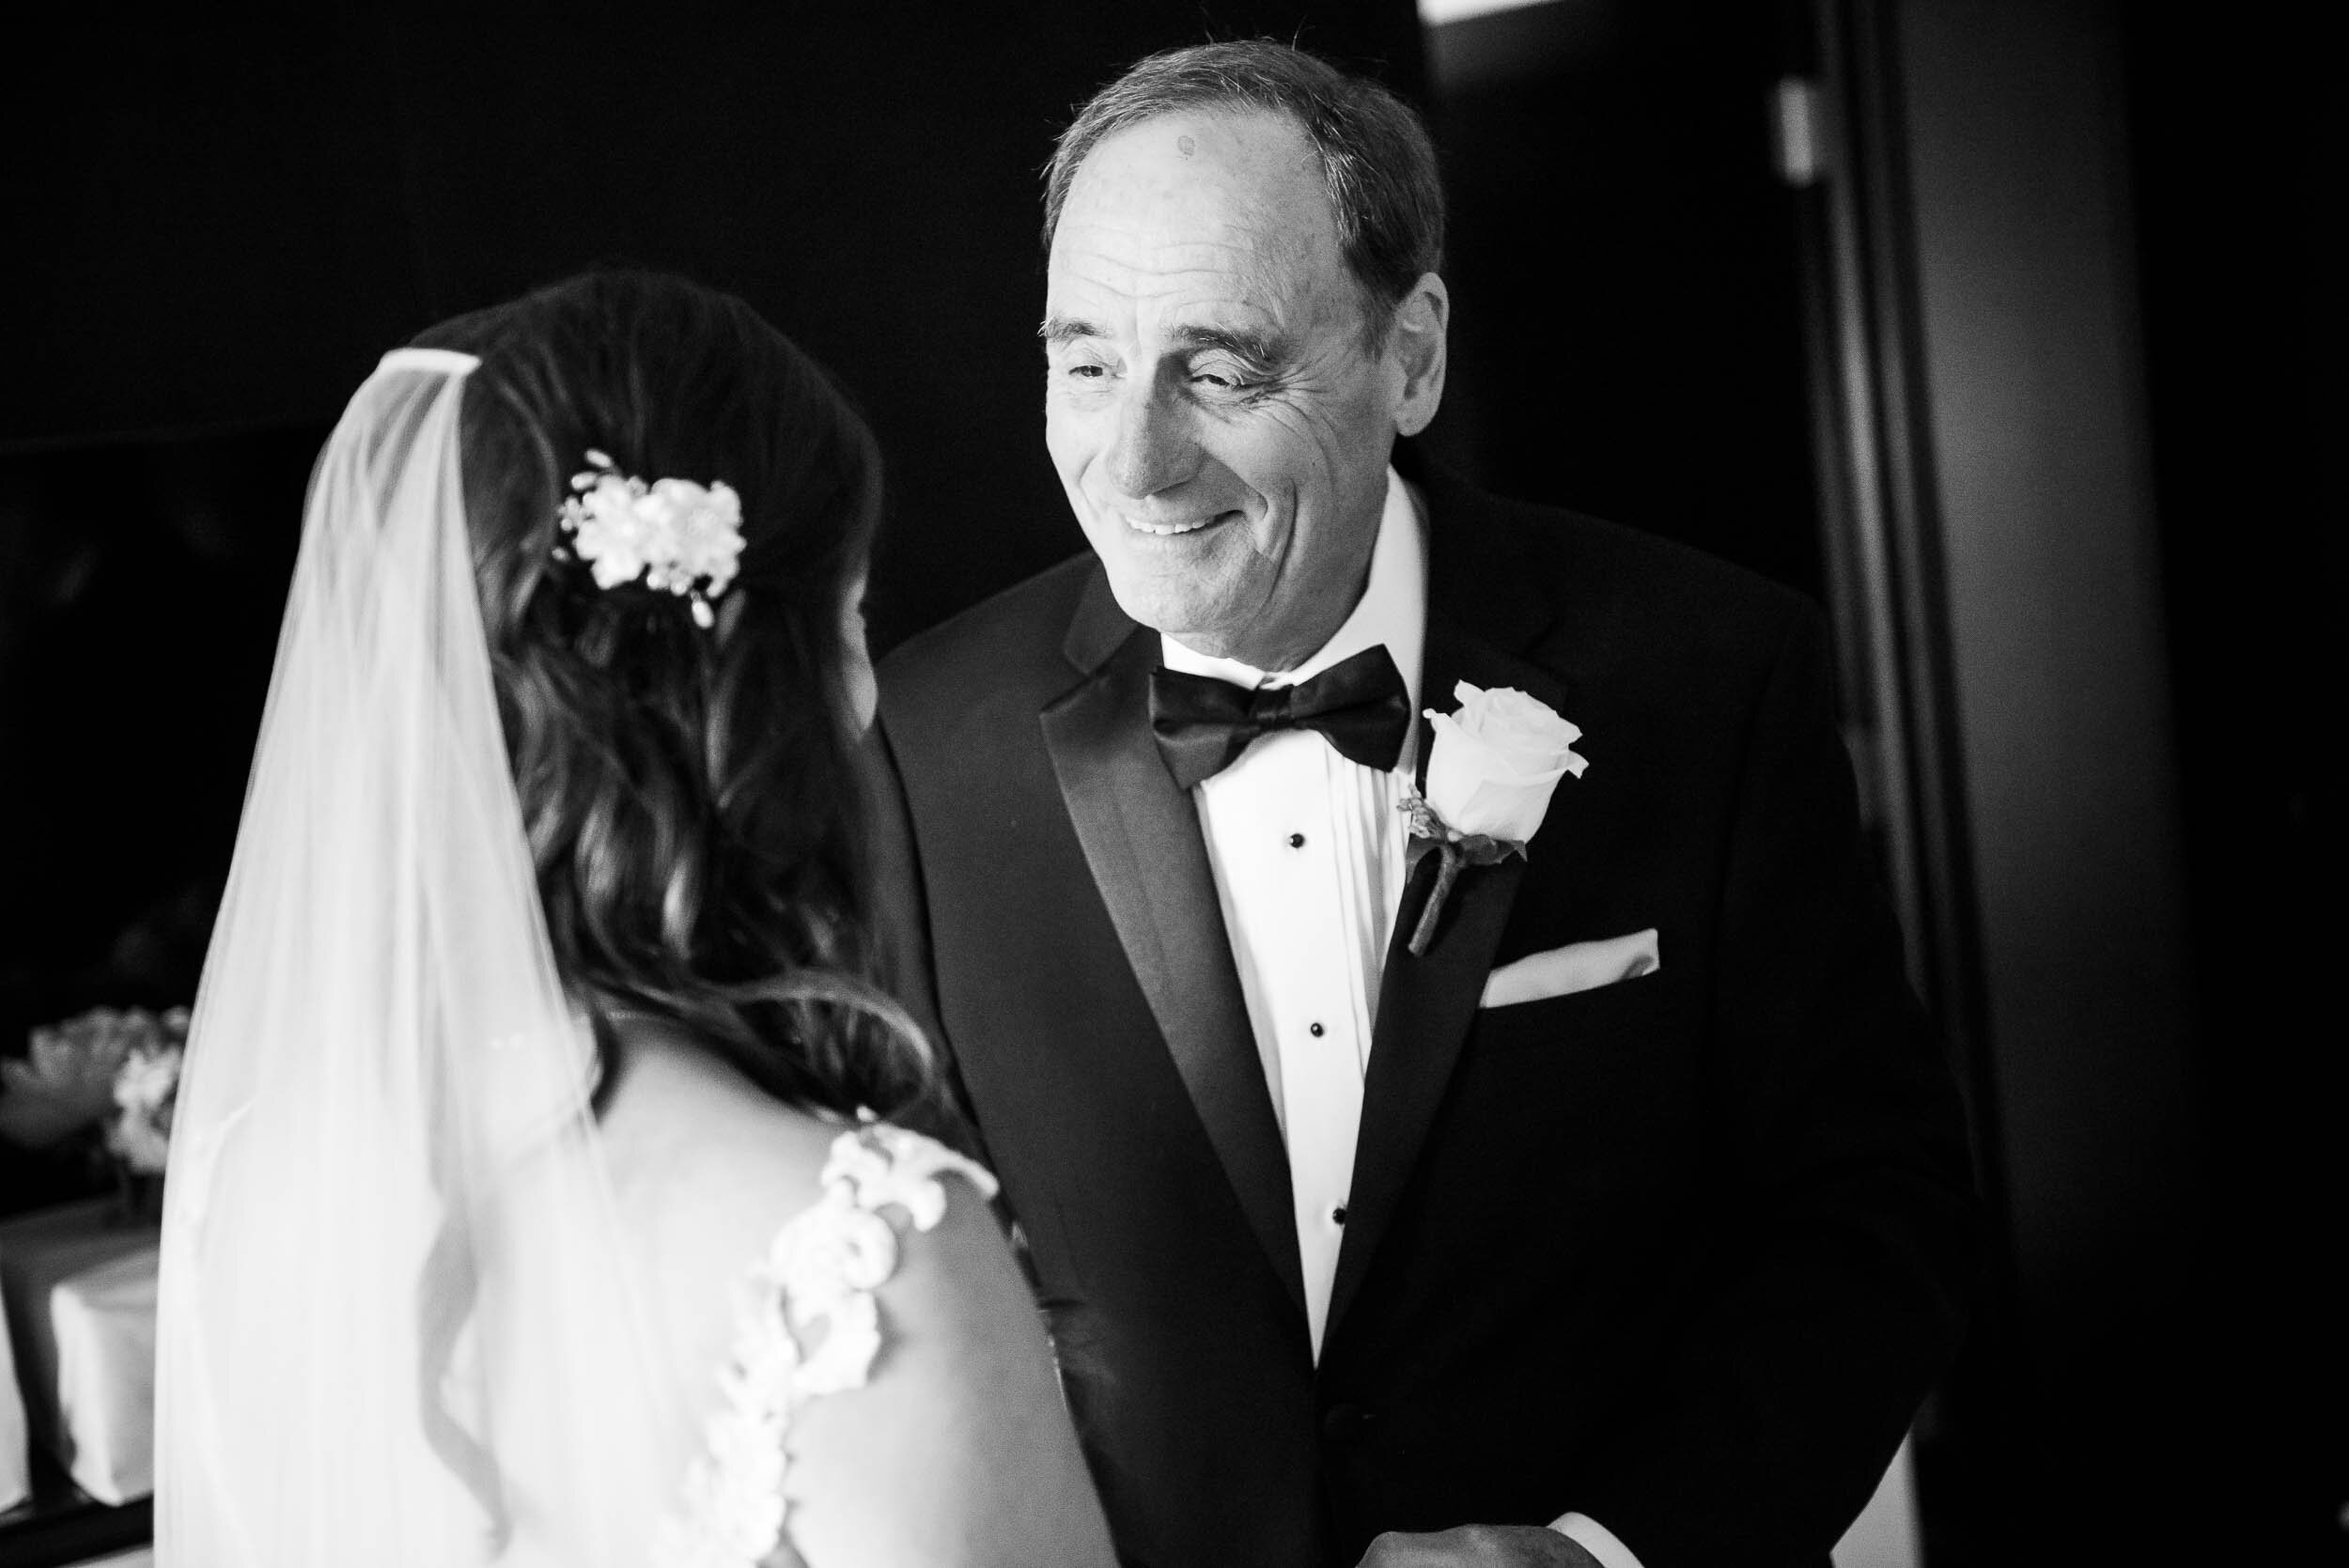 Father daughter wedding photography: Loews Chicago Hotel Wedding captured by J. Brown Photography